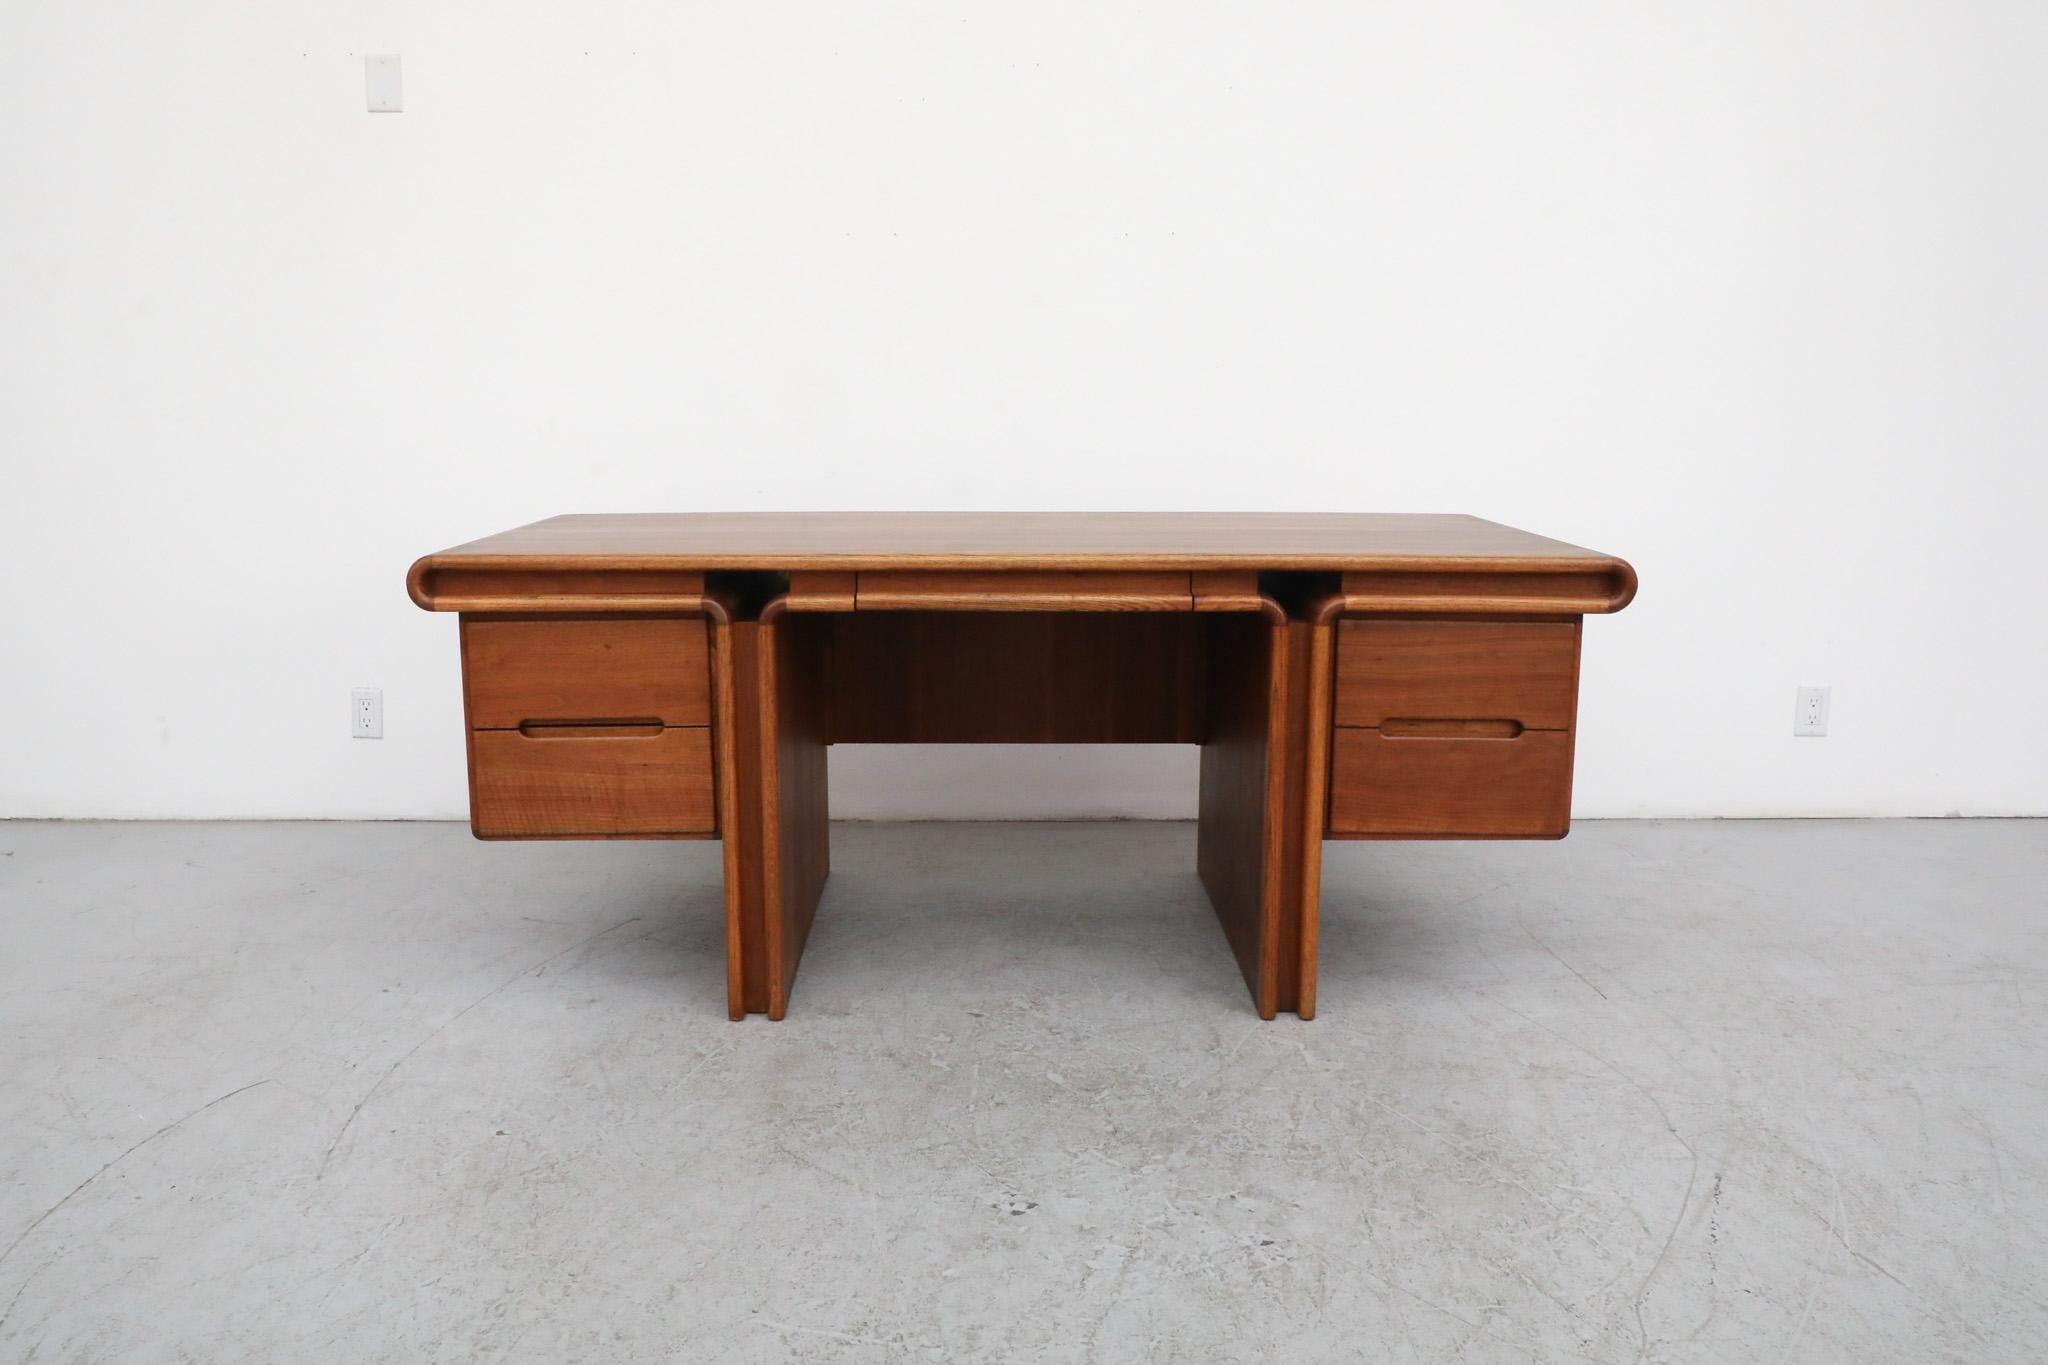 Stunning crafted executive desk by renowned California craftsman Lou Hodges in walnut, oak and koa woods for Creative Crafts, circa 1960. Heavy desk with beautiful curvatures and accents with mixed grains that compliment its masterful style. Lou